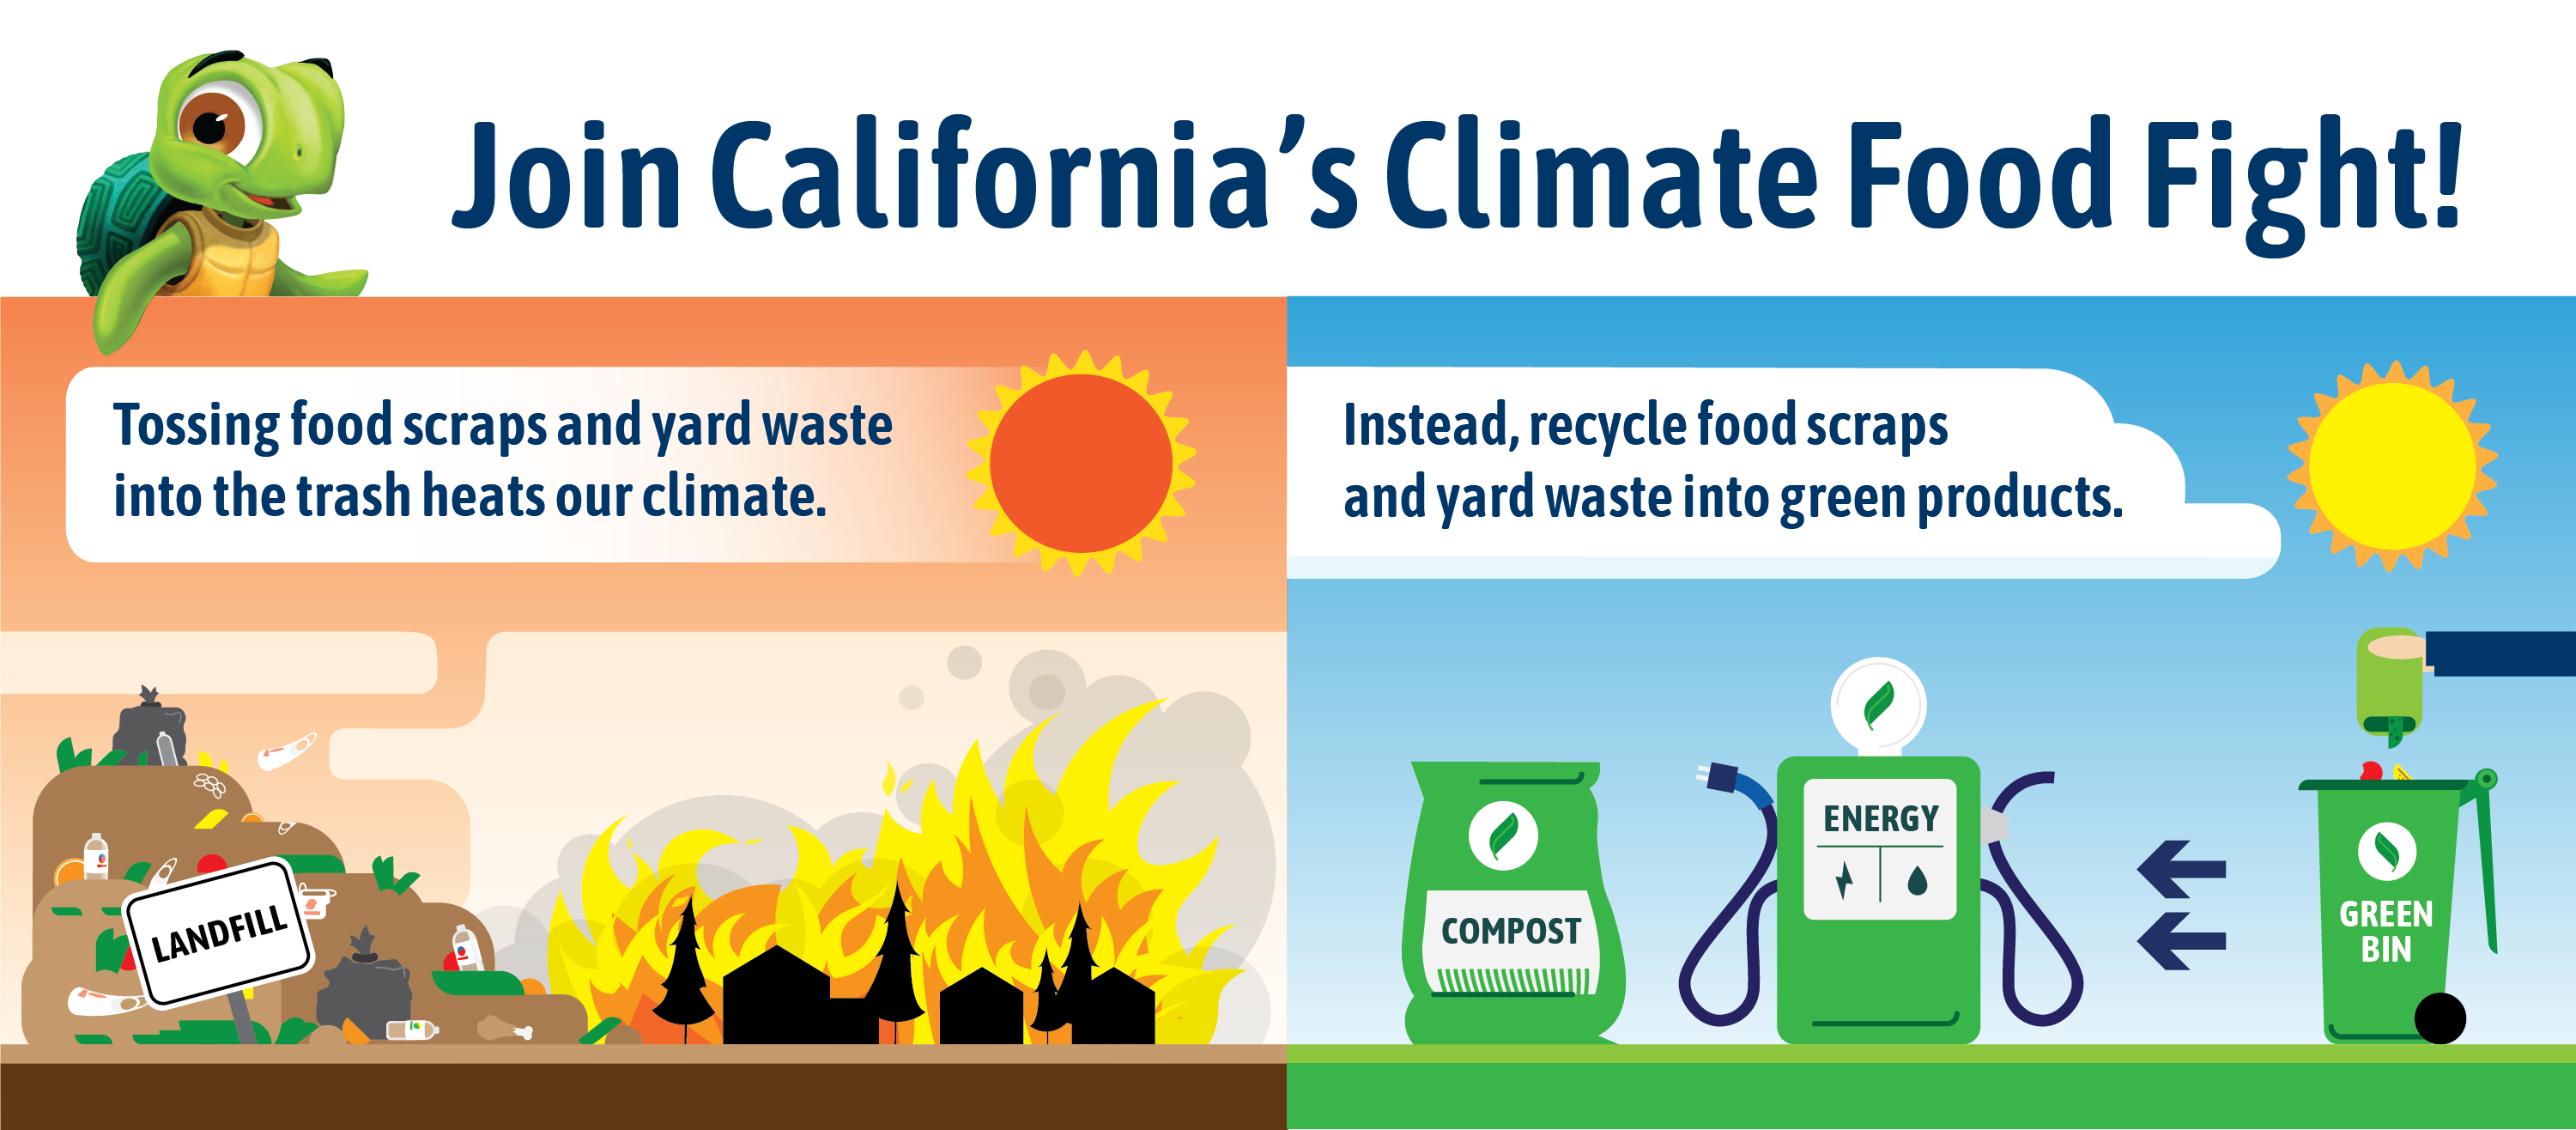 Join California's Climate Food Fight! Tossing food scraps and yard waste into the trash heats our climate. Instead, recycle food scraps and yard waste into green products.